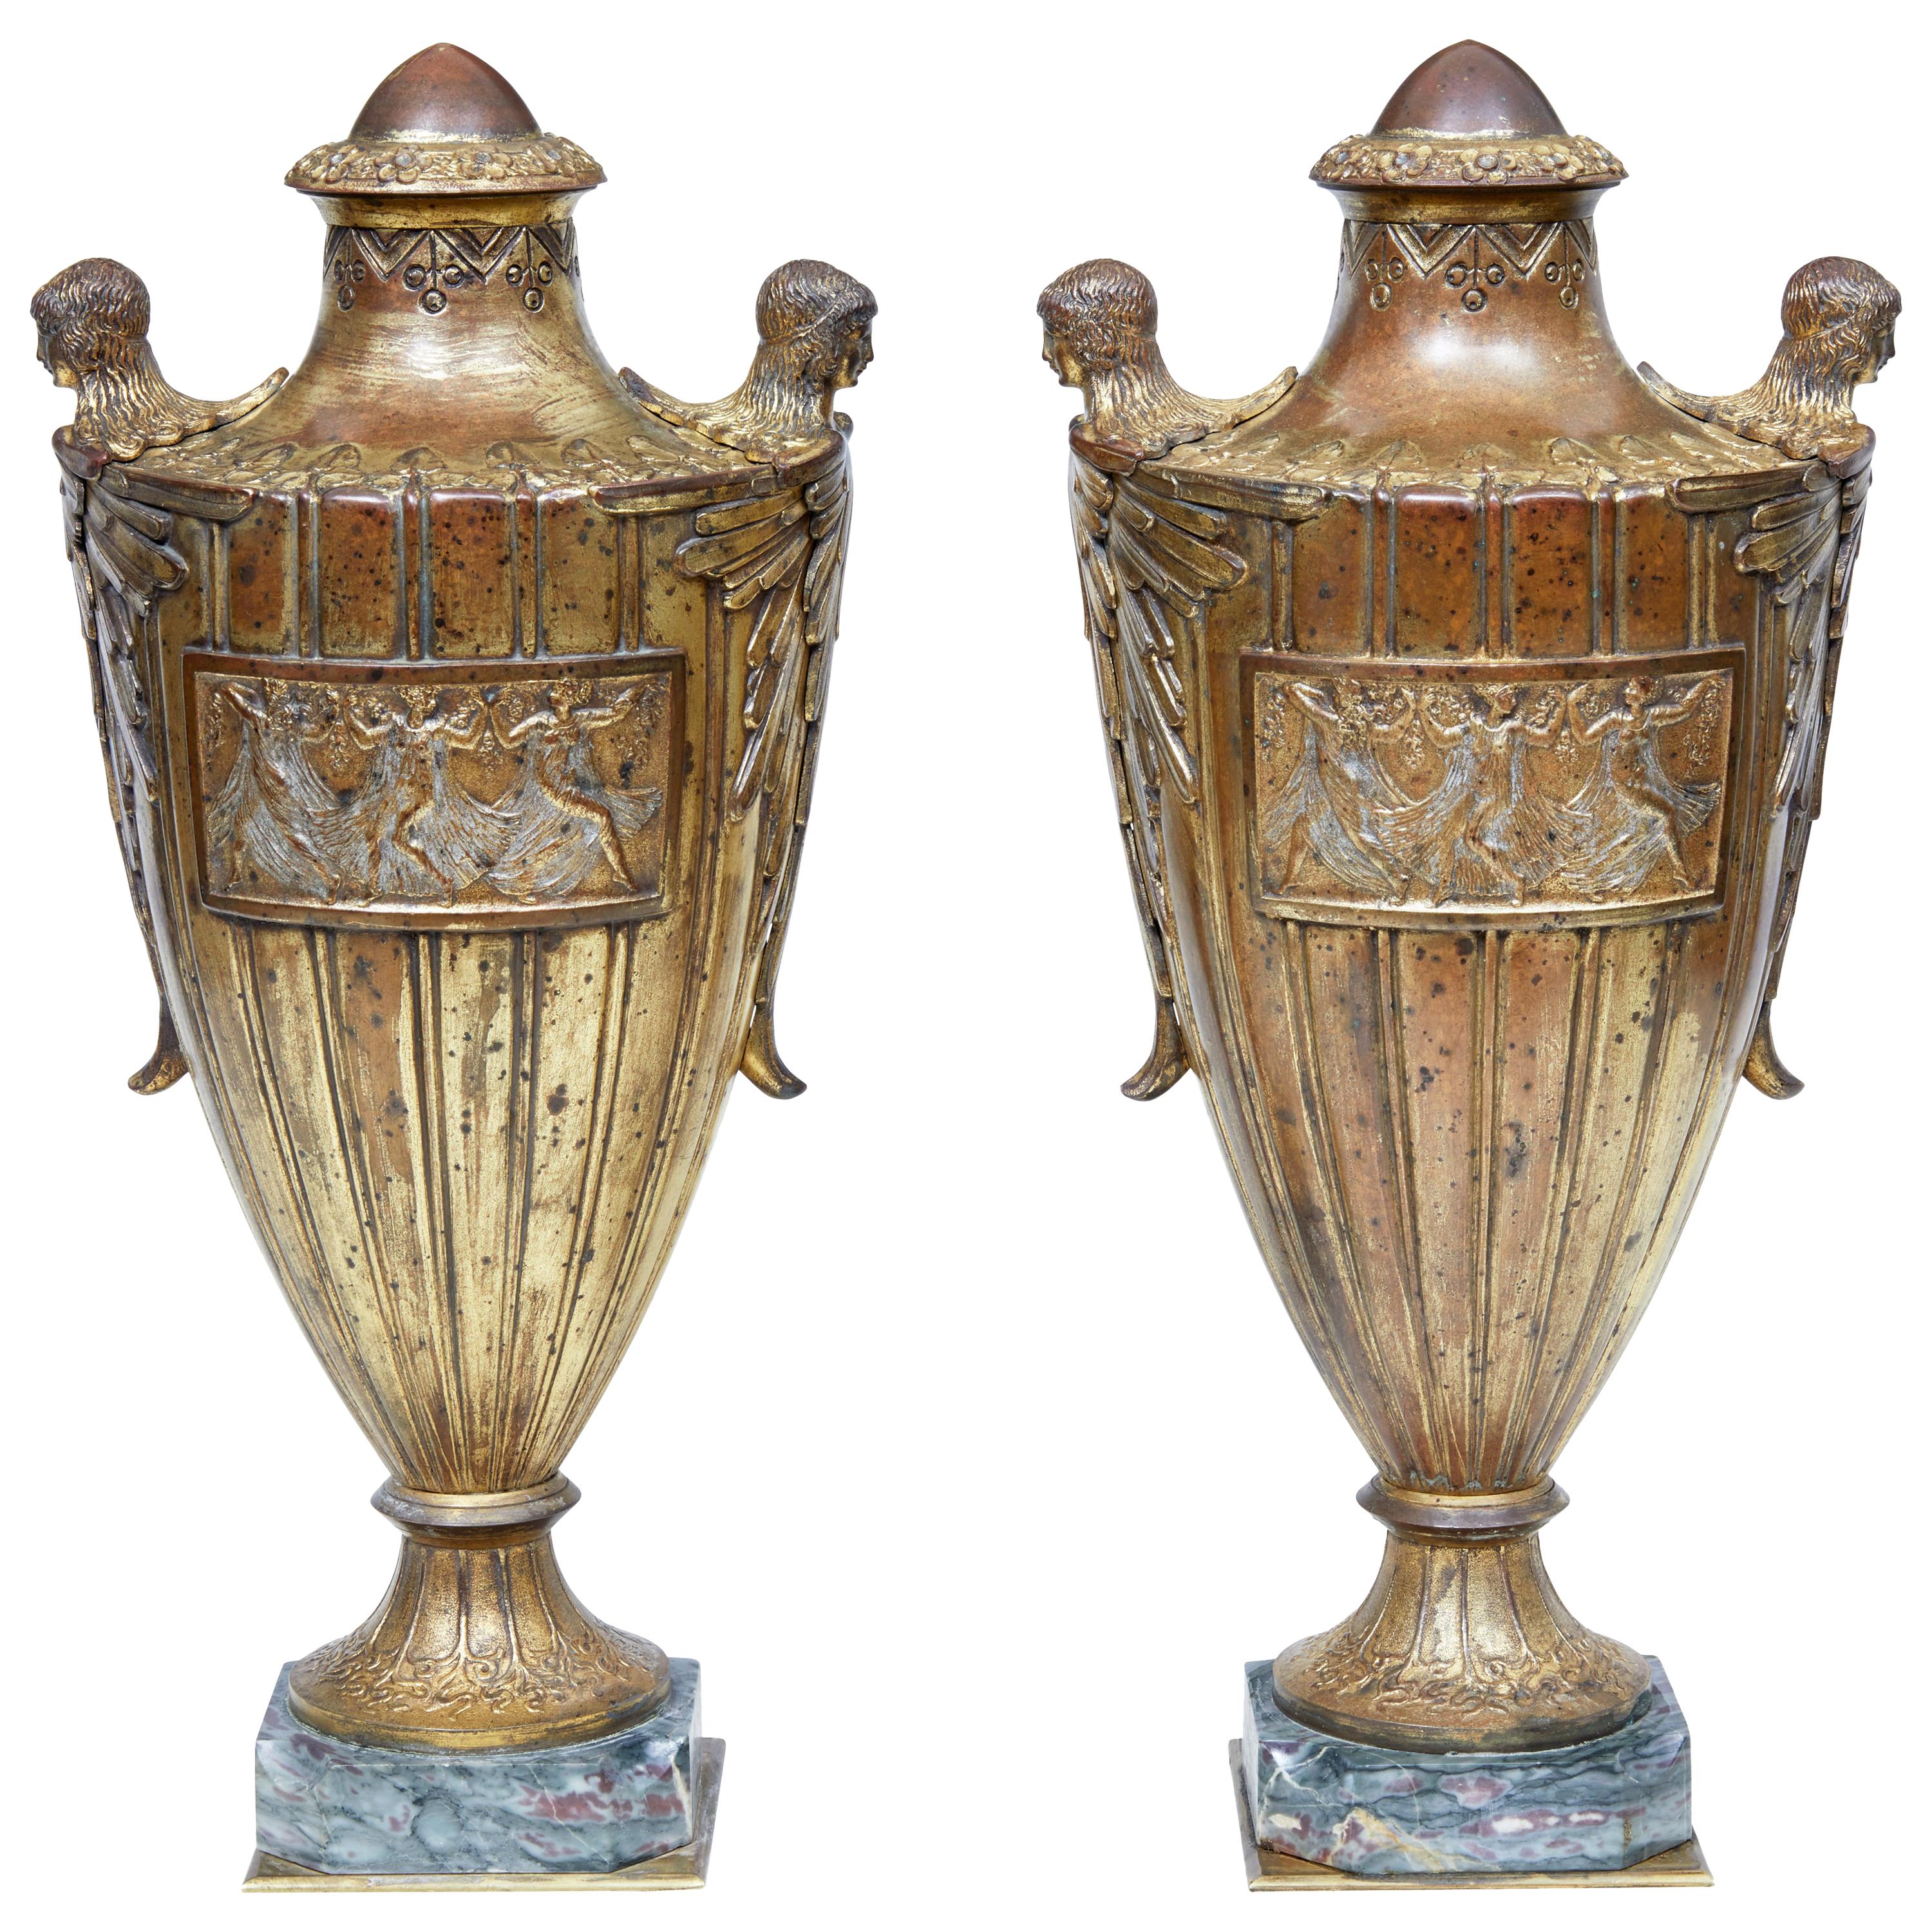 Rare Pair of French Solid Bronze and Gilt Decorative Urns